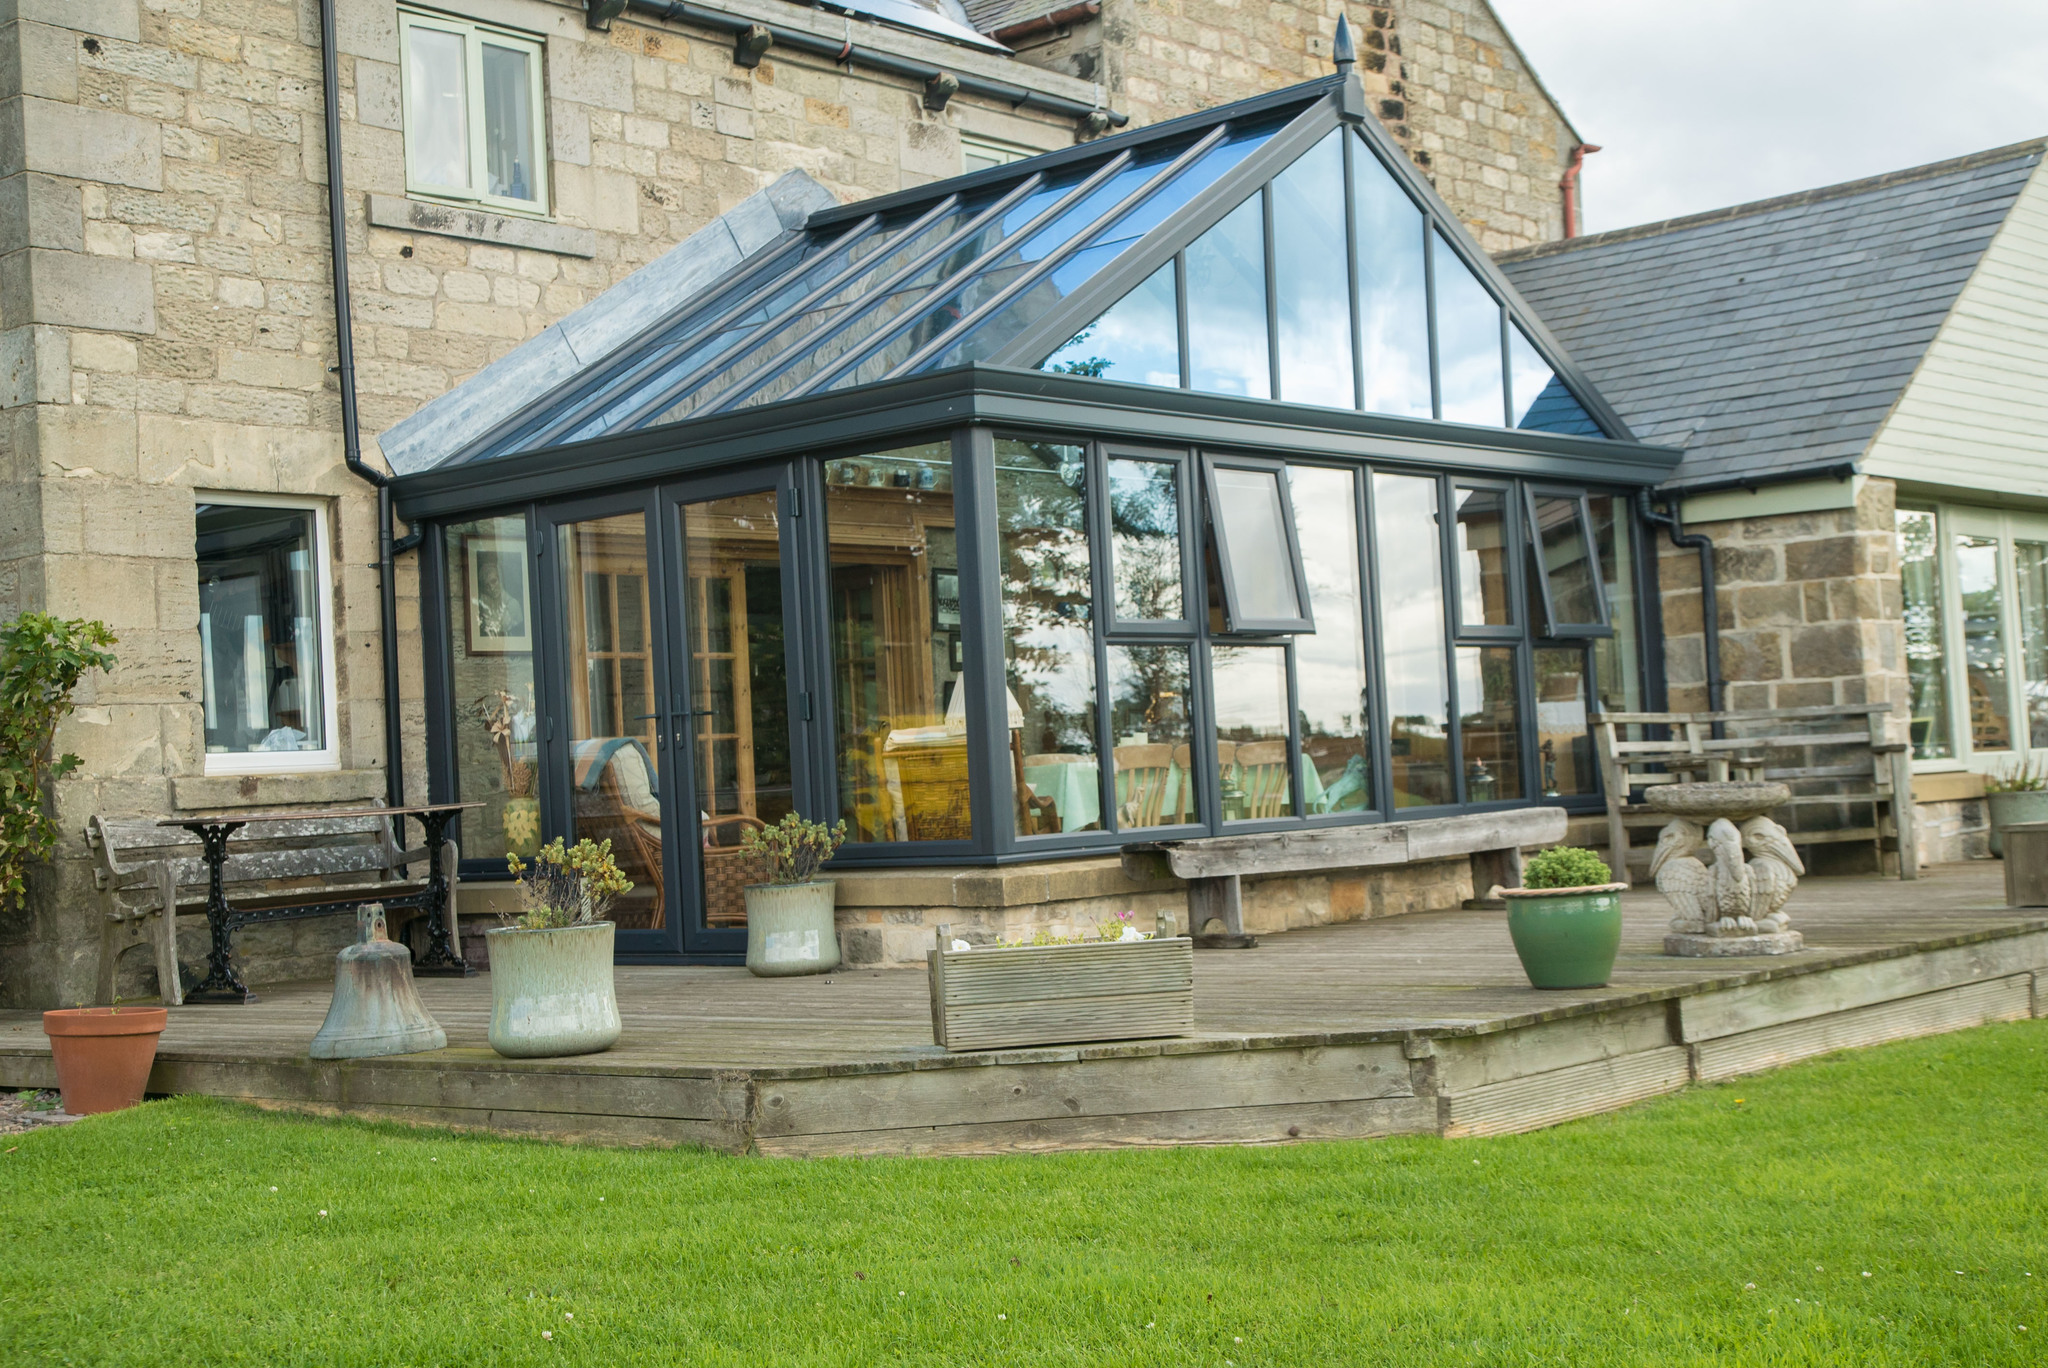 Interior view of a Gable-End Conservatory, illustrating its thermally efficient design with expansive glazing for natural light, ensuring a warm and cozy atmosphere in winter and a cool environment in summer